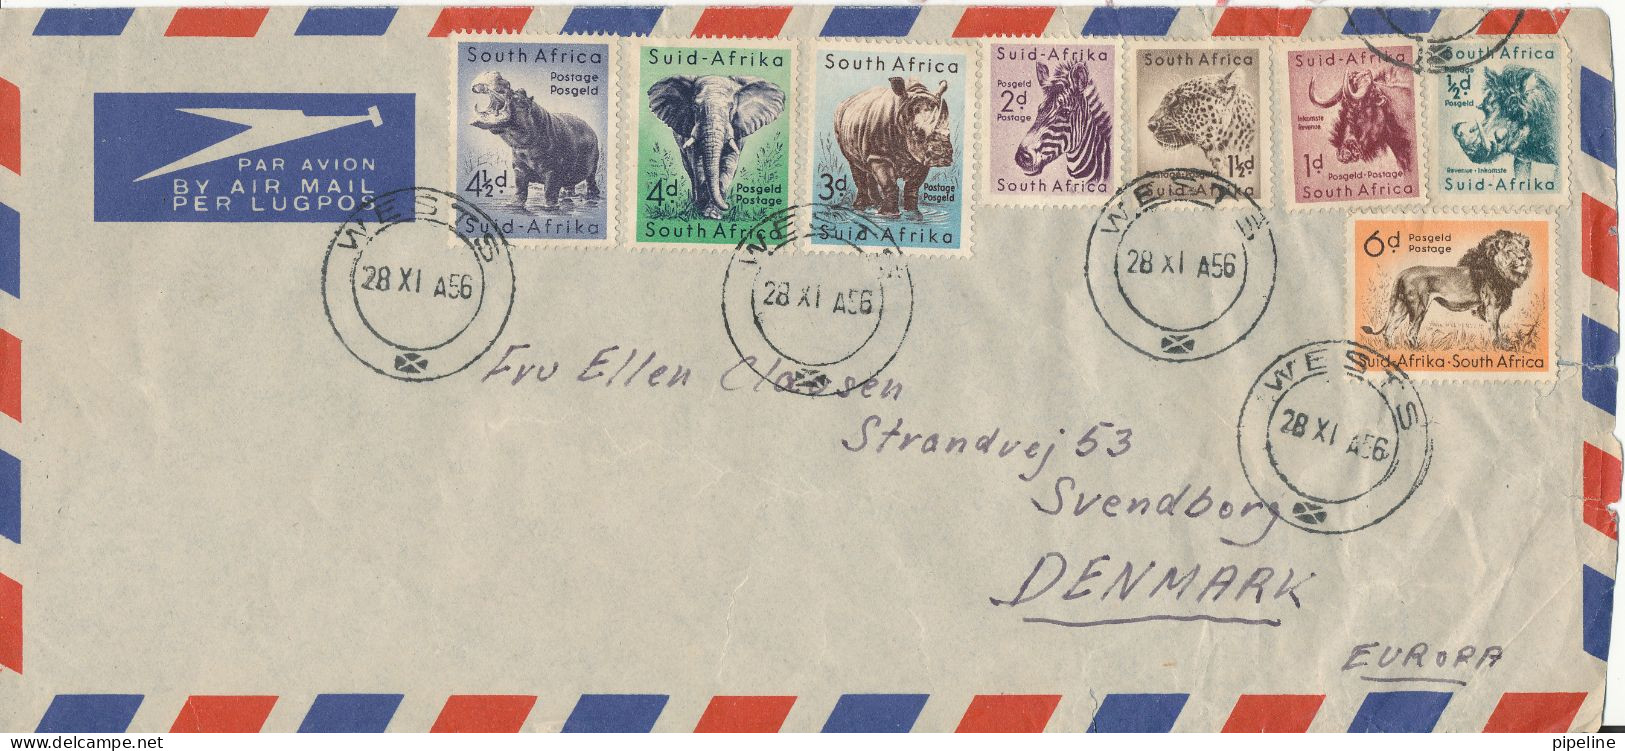 South Africa -Suid Afrika Air Mail Cover Sent To Denmark Wests 28-11-1956 With A Lot Of Topical Stamps - Luchtpost